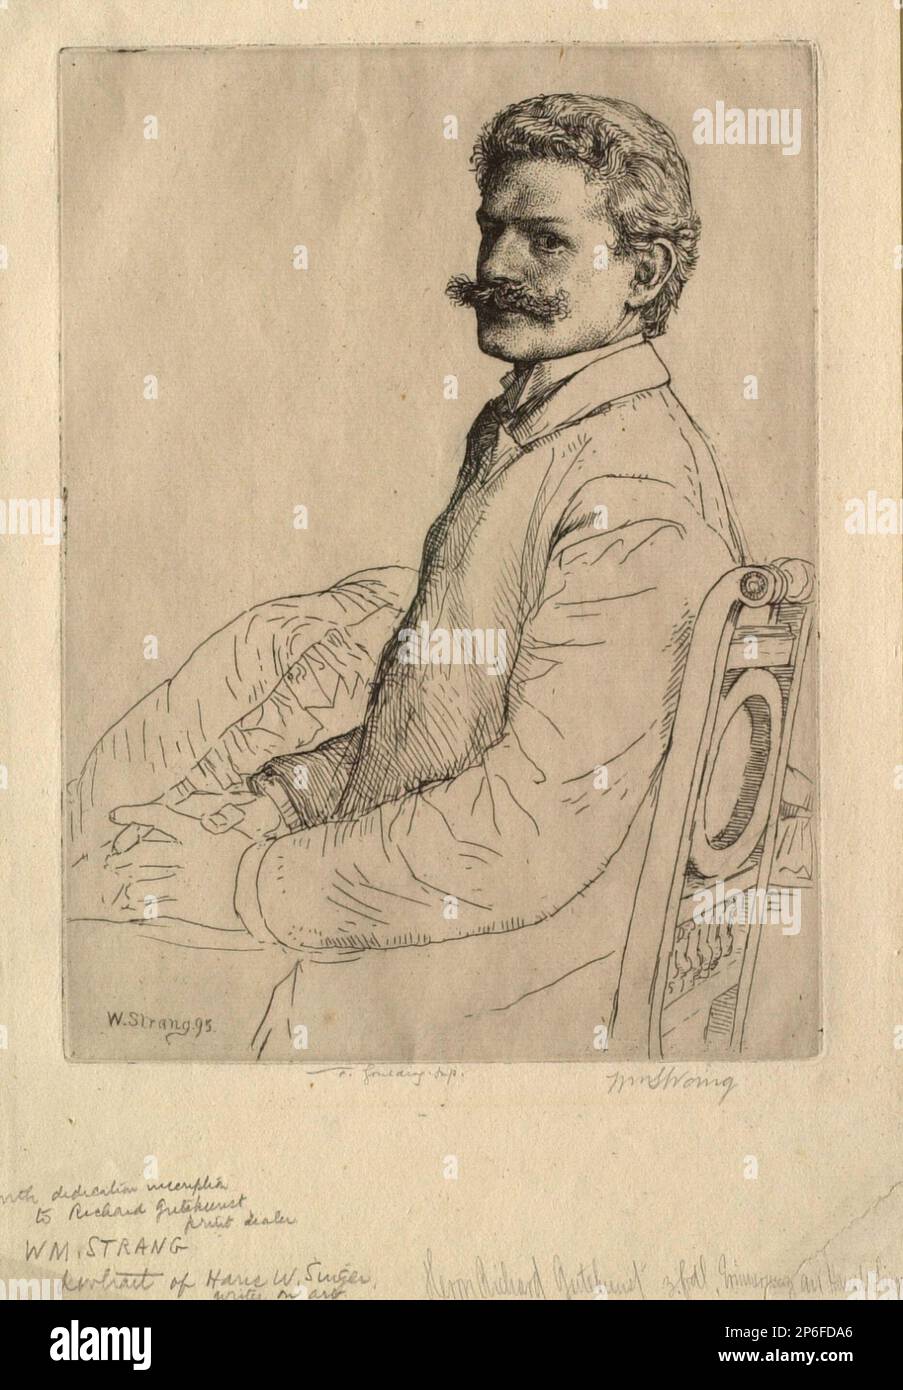 William Strang, Portrait of Hans W. Singer, 1895, etching on laid paper. Stock Photo